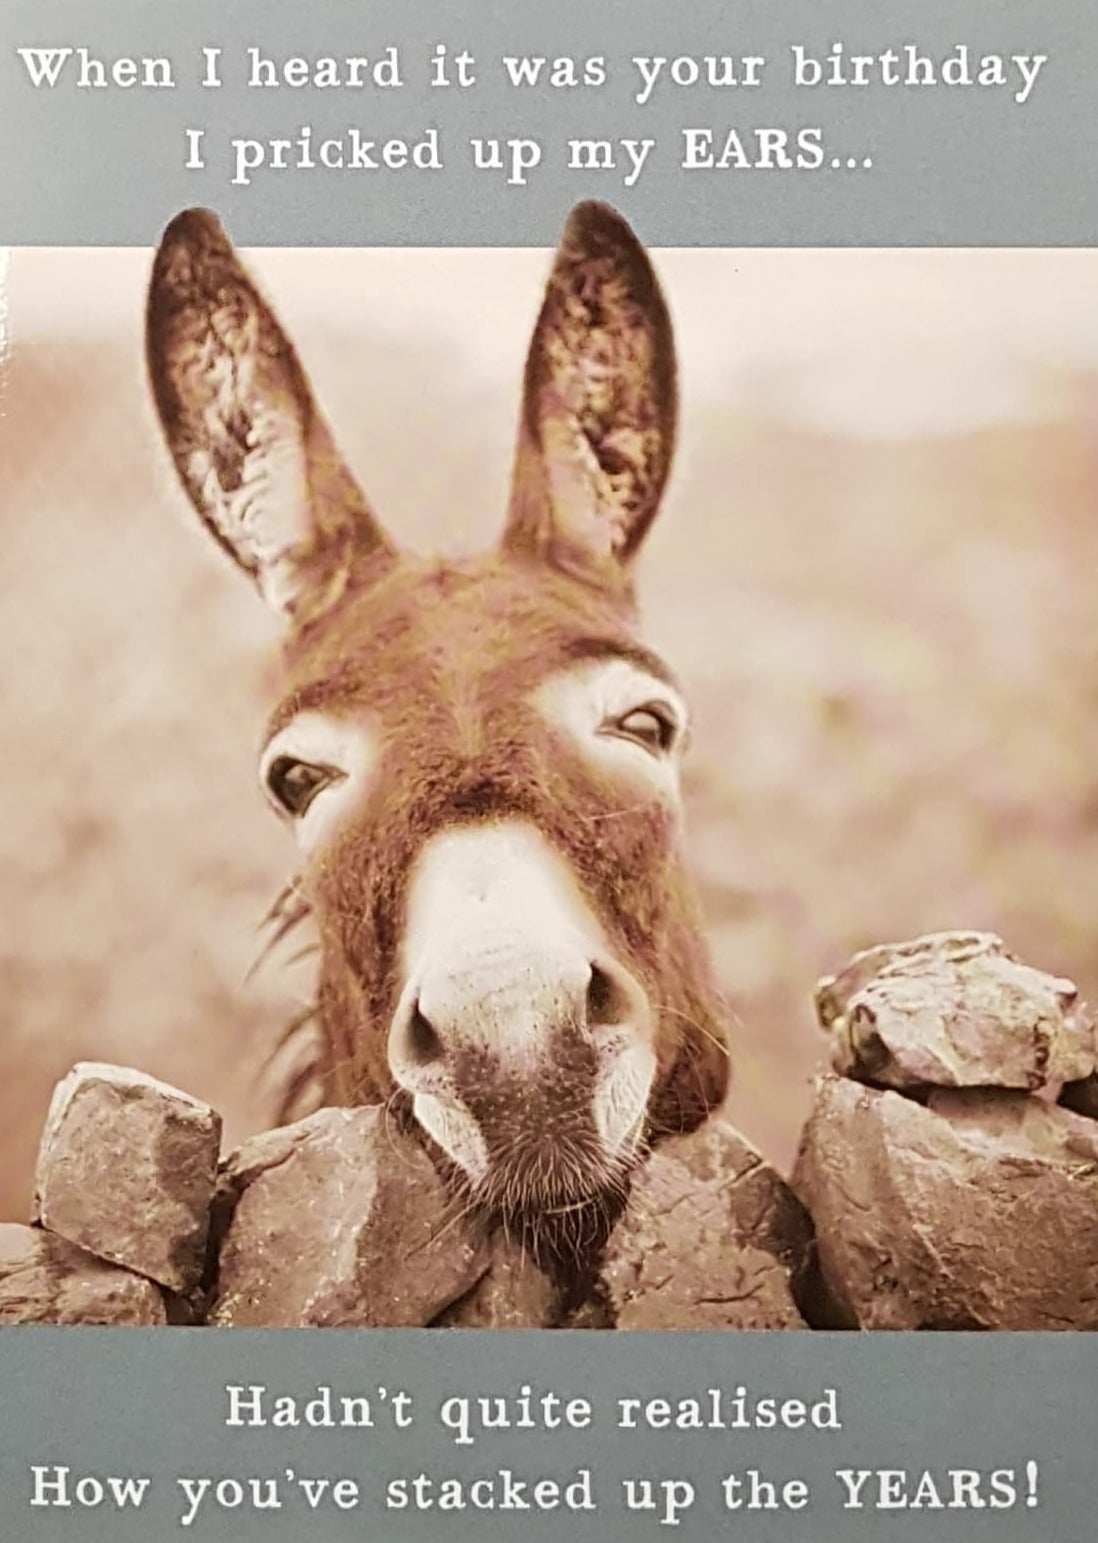 Birthday Card - Humour / Donkey With Ears Perked Up